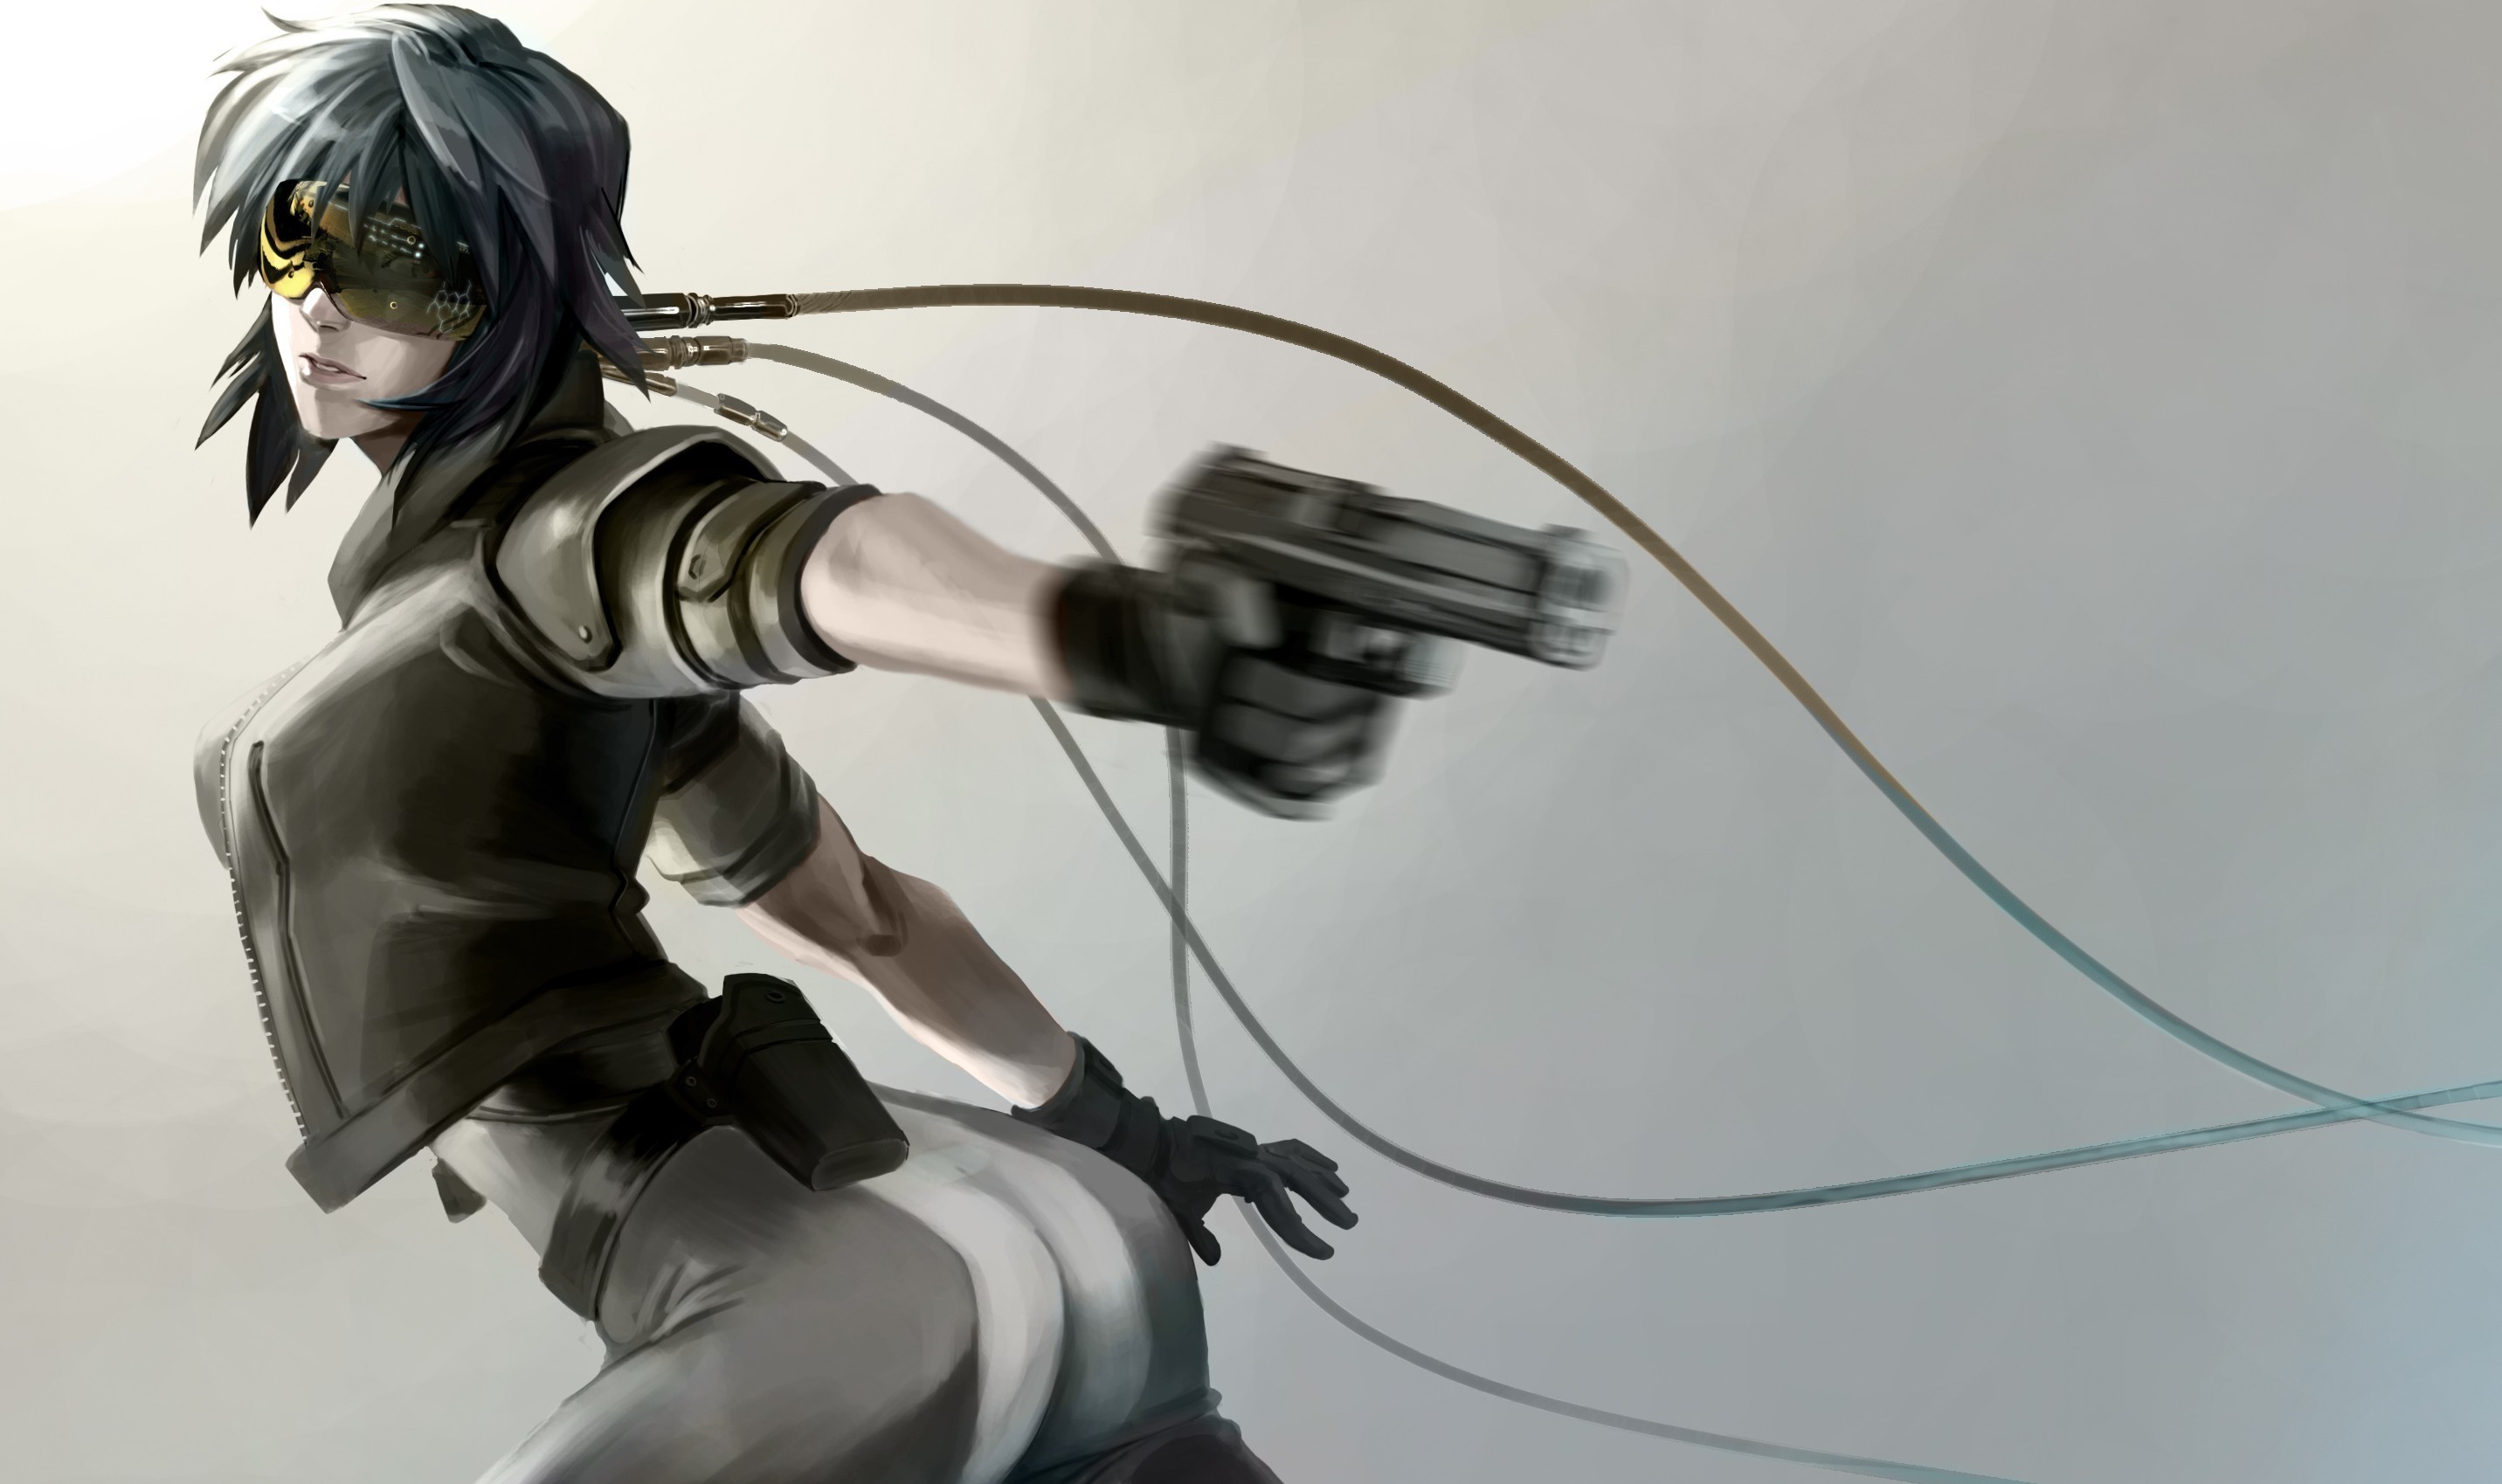 Anime 2864x1699 manga Ghost in the Shell anime ass boobs gun weapon anime girls simple background Kusanagi Motoko girls with guns anime girls with guns